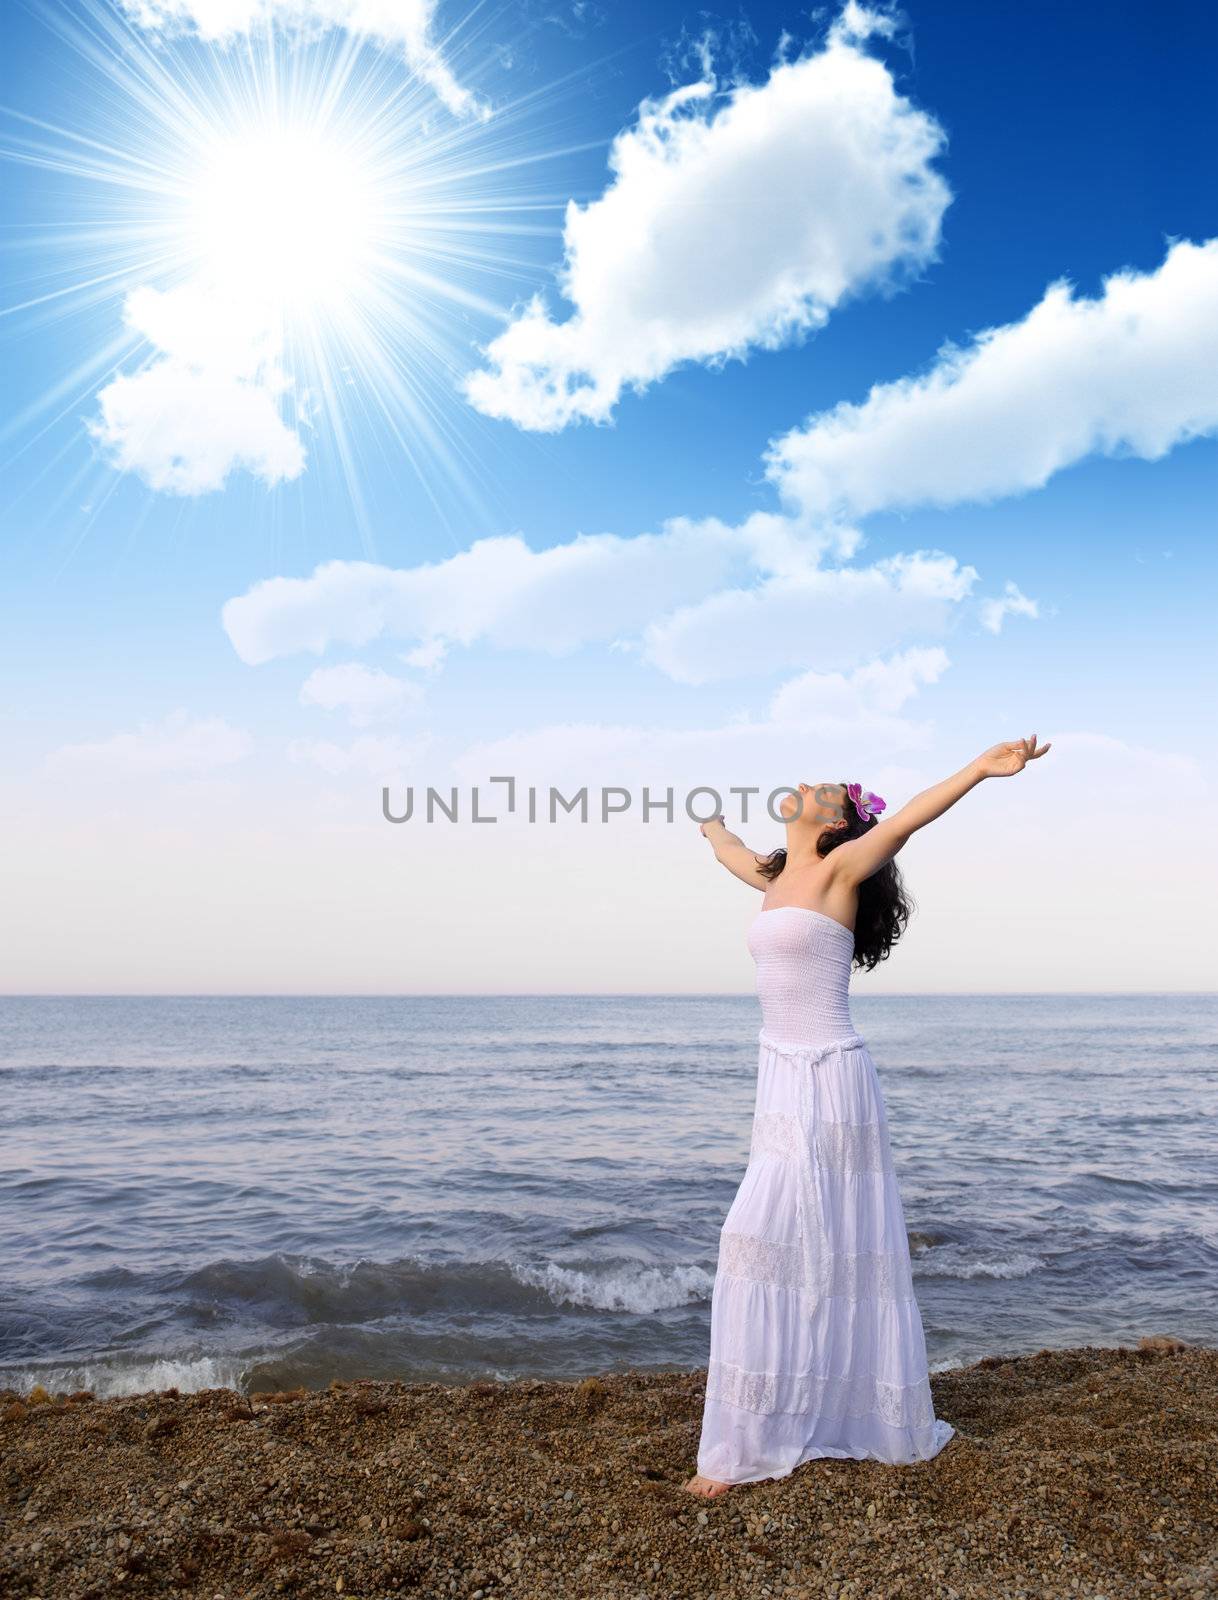 The woman in a white sundress on seacoast with open hands. Cloud sky